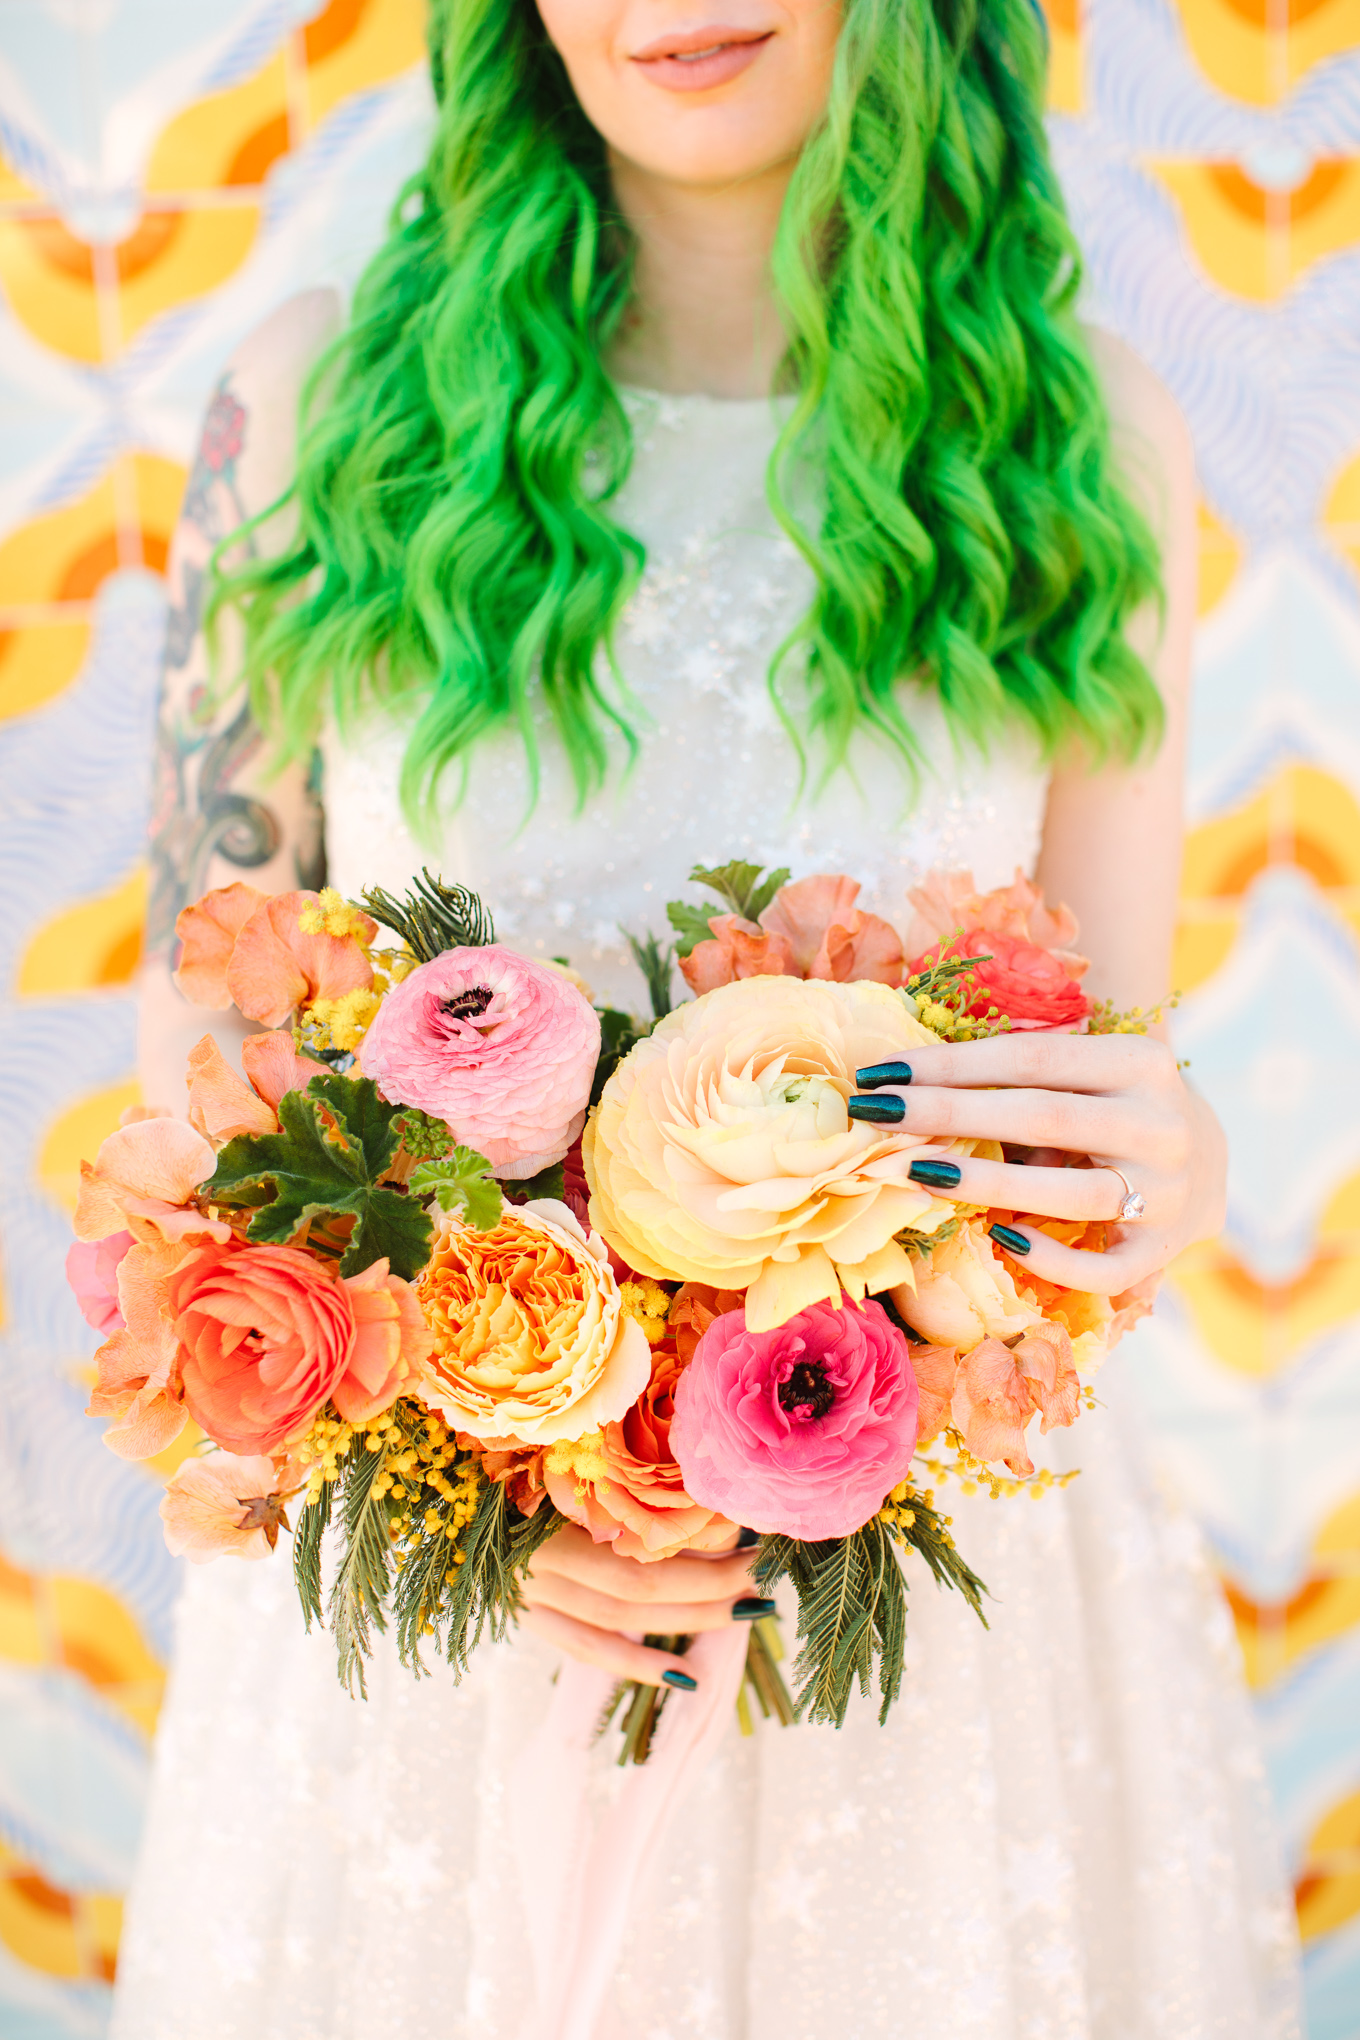 Funky and colorful ranunculus wedding flowers with black bridal manicure | Beautiful bridal bouquet inspiration and advice | Colorful and elevated wedding photography for fun-loving couples in Southern California | #weddingflowers #weddingbouquet #bridebouquet #bouquetideas #uniquebouquet   Source: Mary Costa Photography | Los Angeles